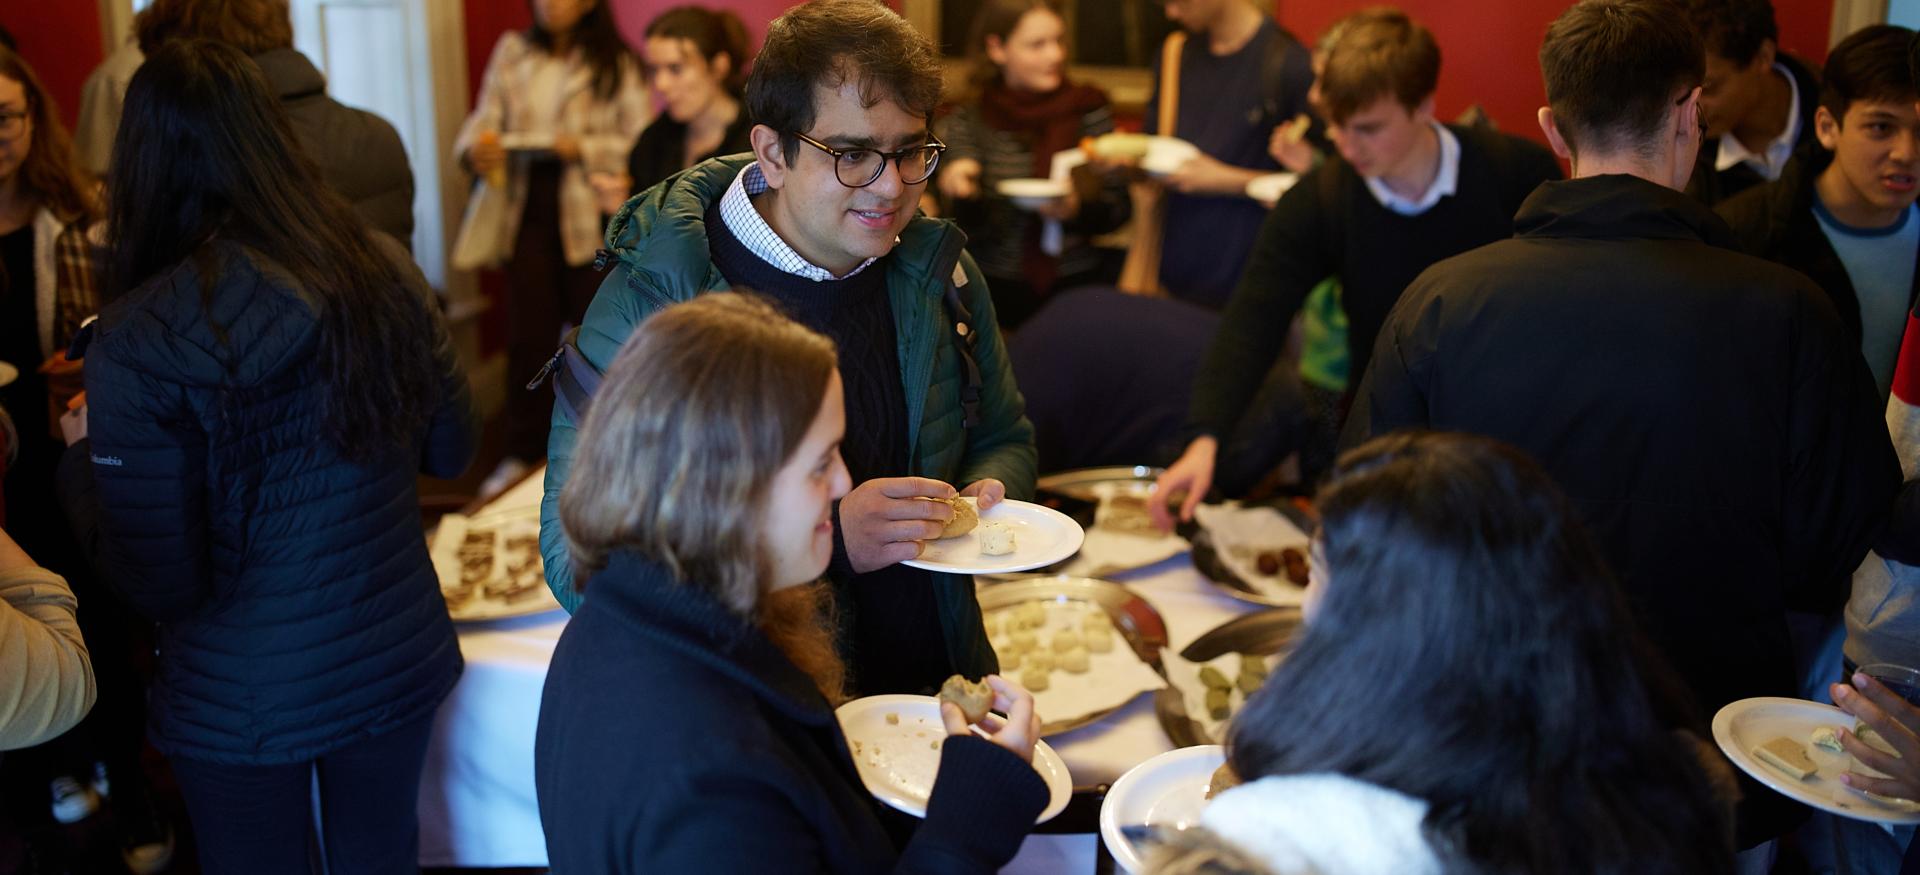 A group of postgraduate students take plates of food and chat in the President's Lodgings of Trinity College.